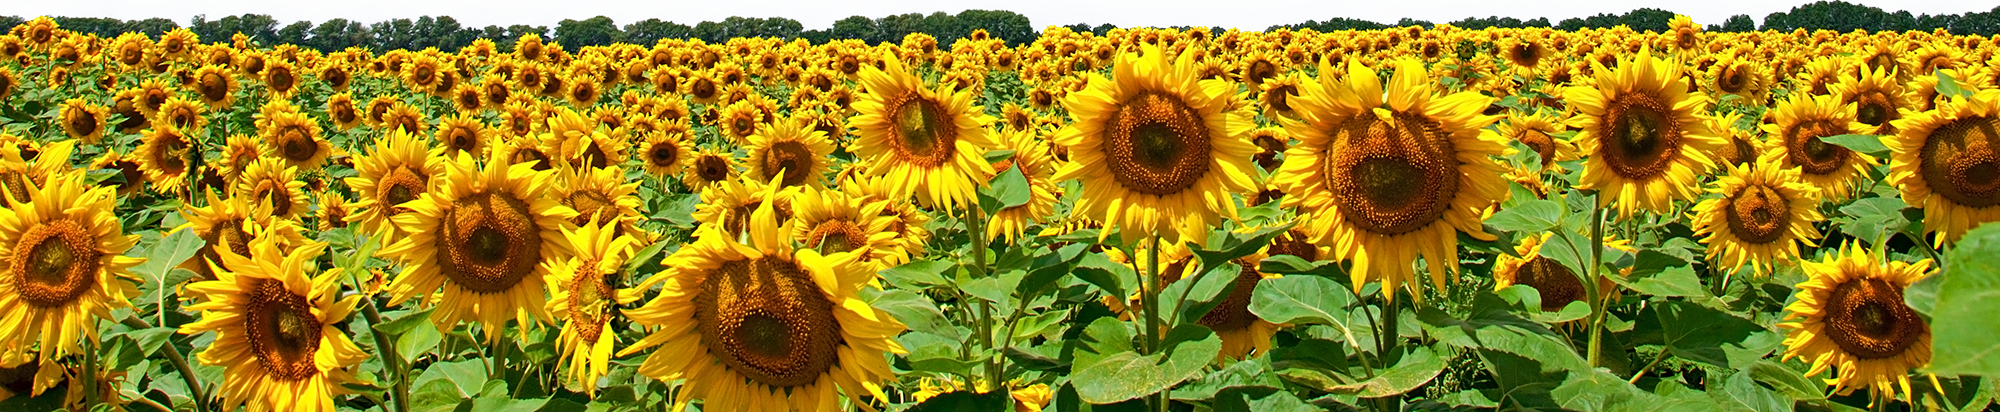 Footer-Sunflowers